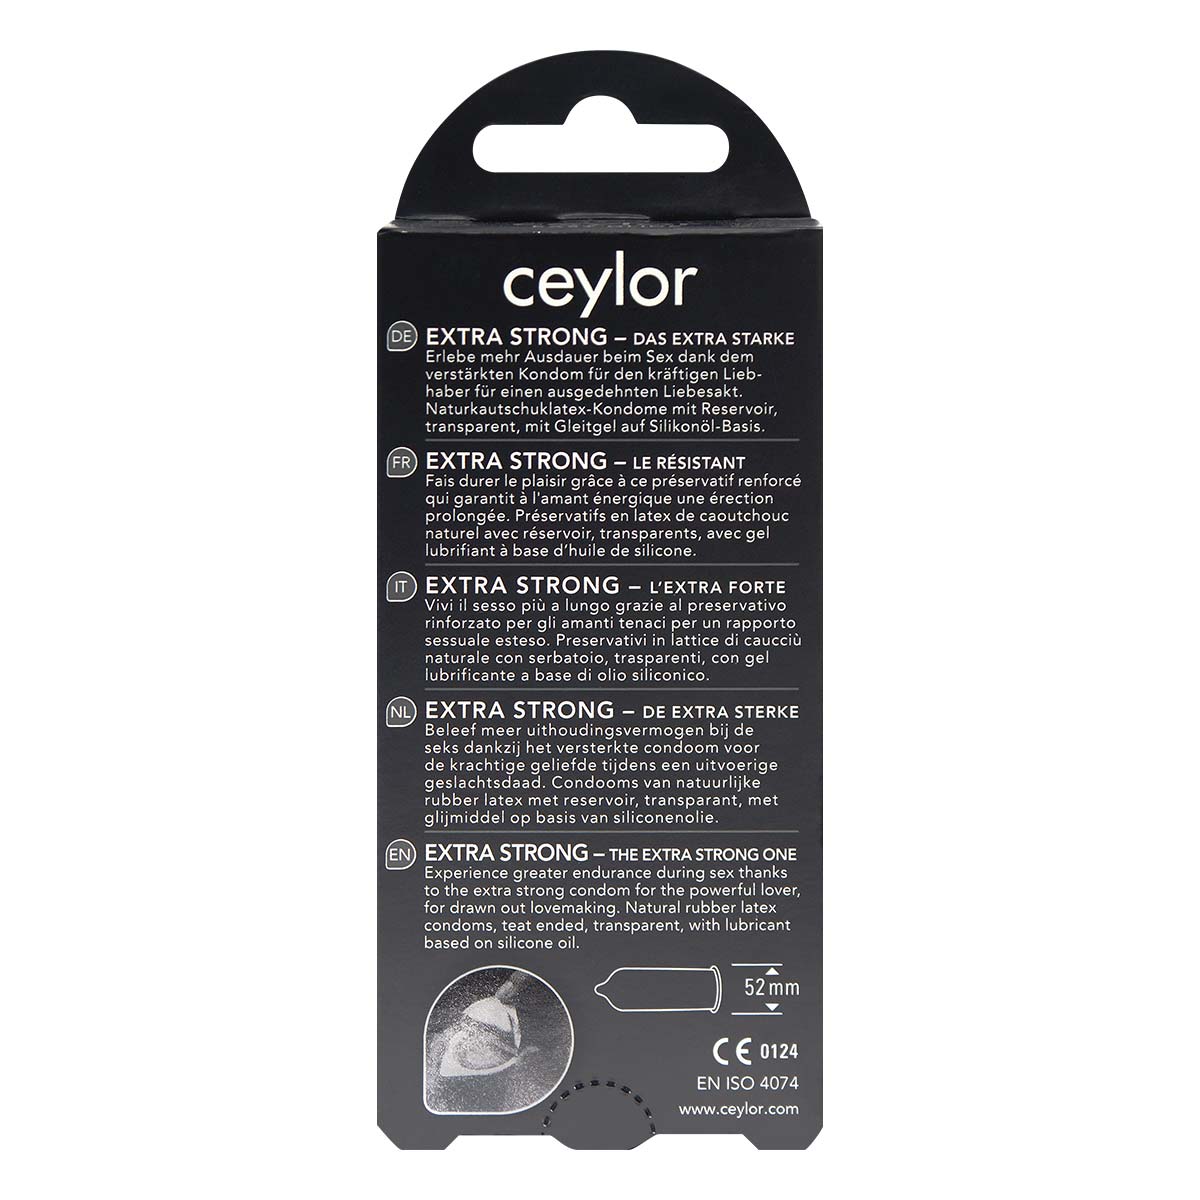 Ceylor Extra Strong Pack Condom - Sampson Store